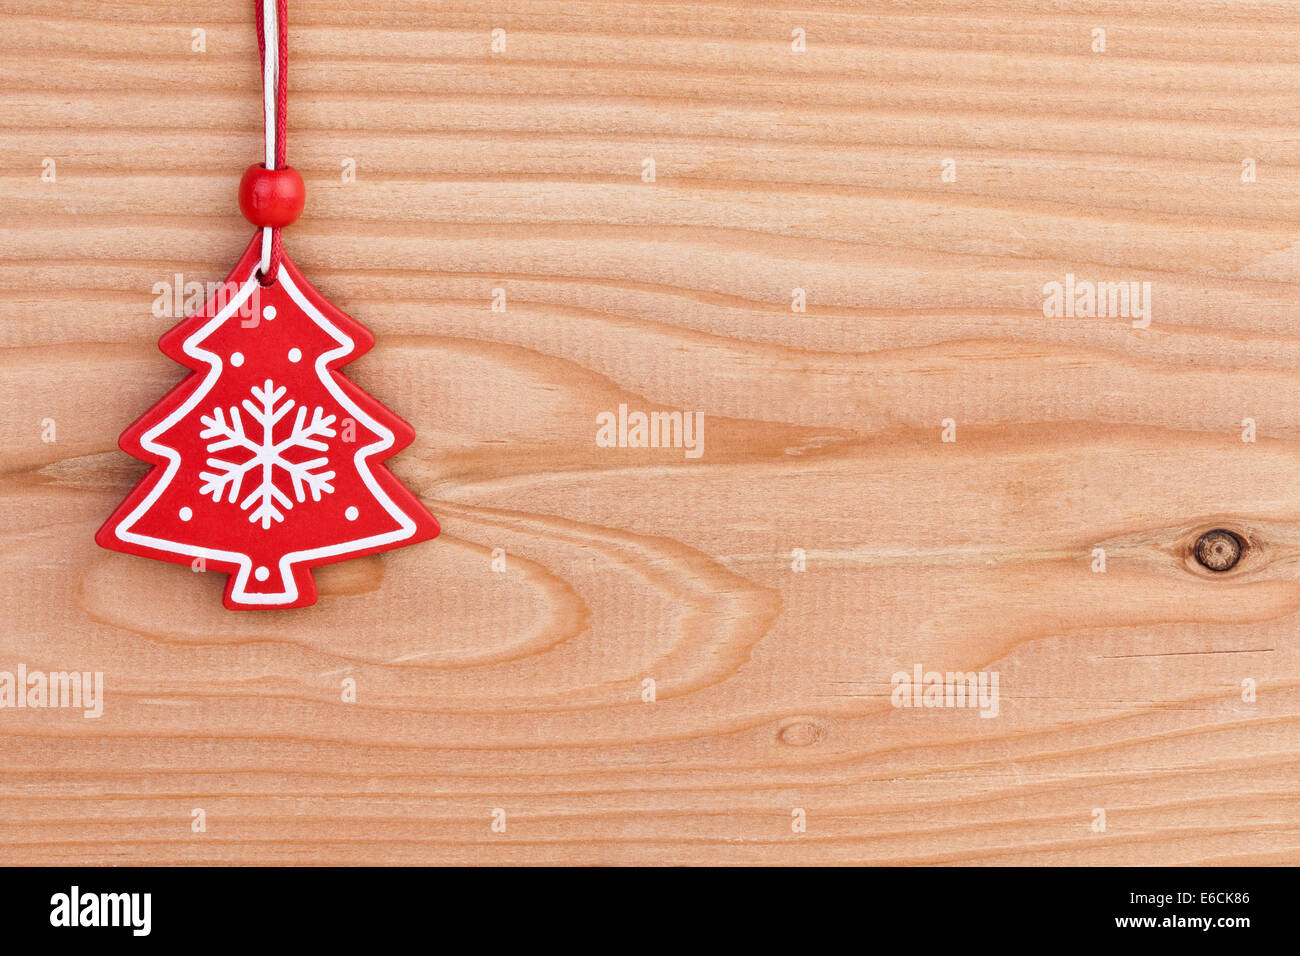 Christmas tree decoration over wooden background Stock Photo